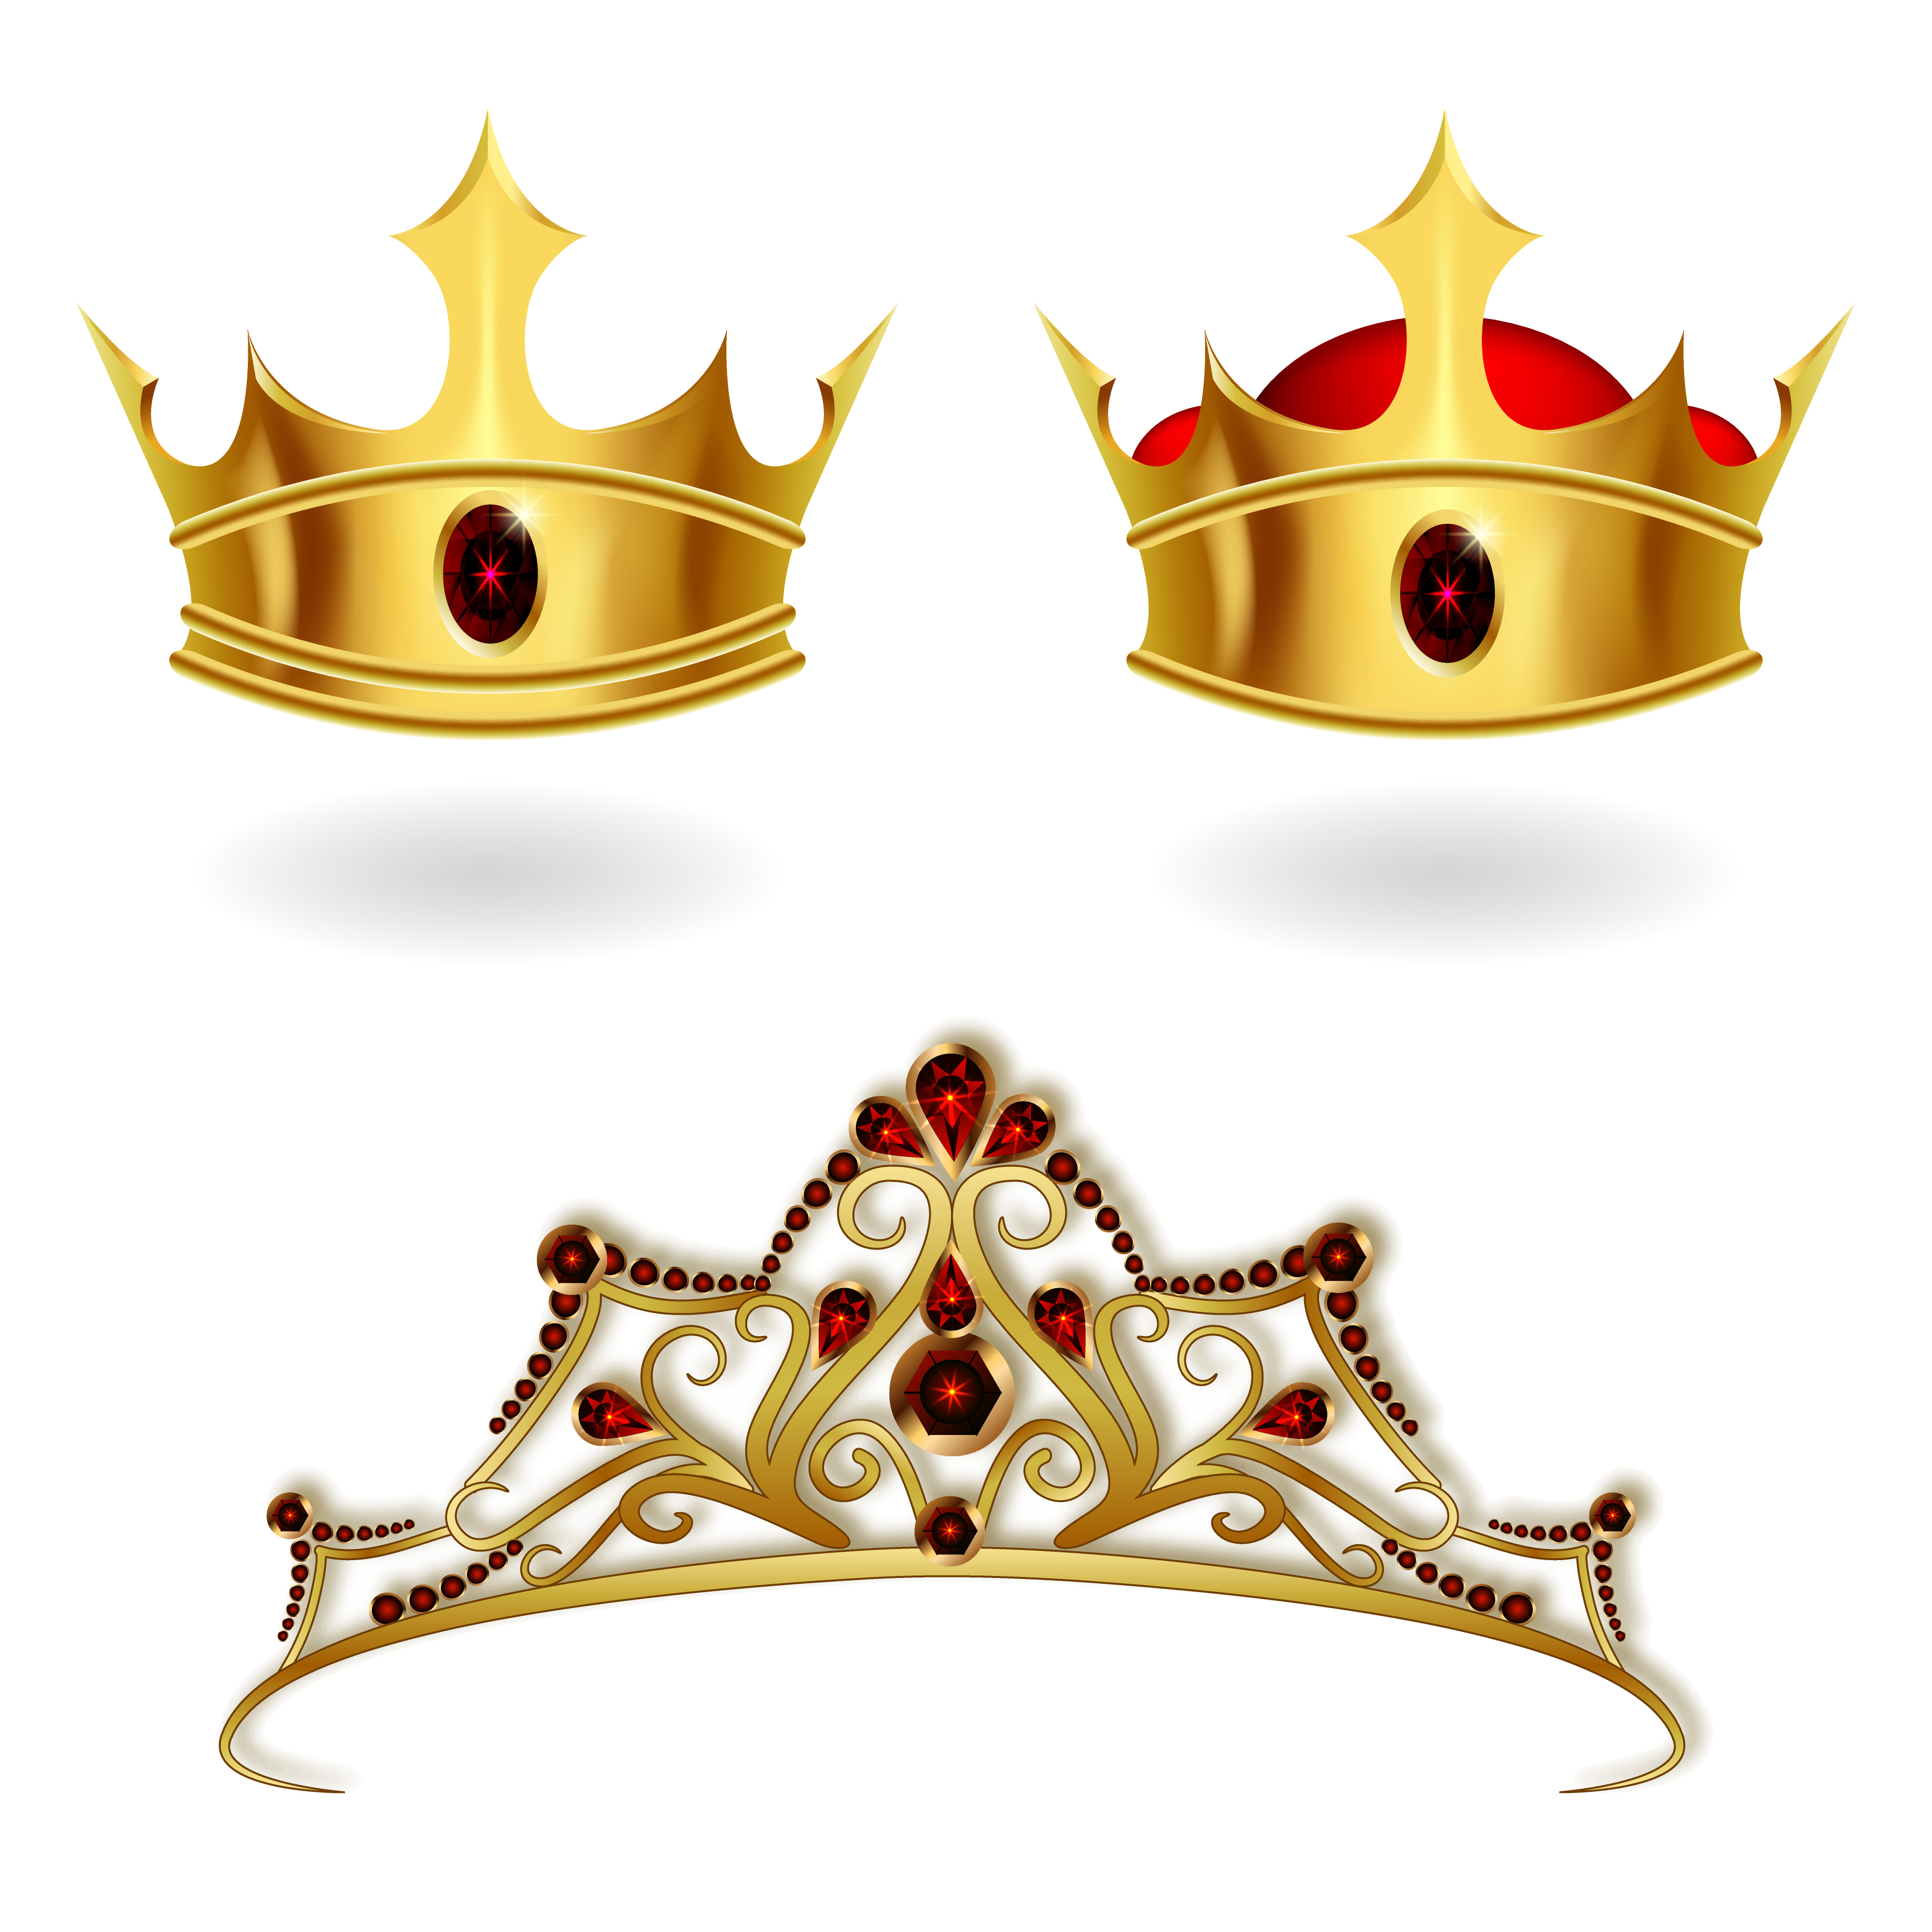 Download A set of realistic gold crowns and a tiara - Download Free ...